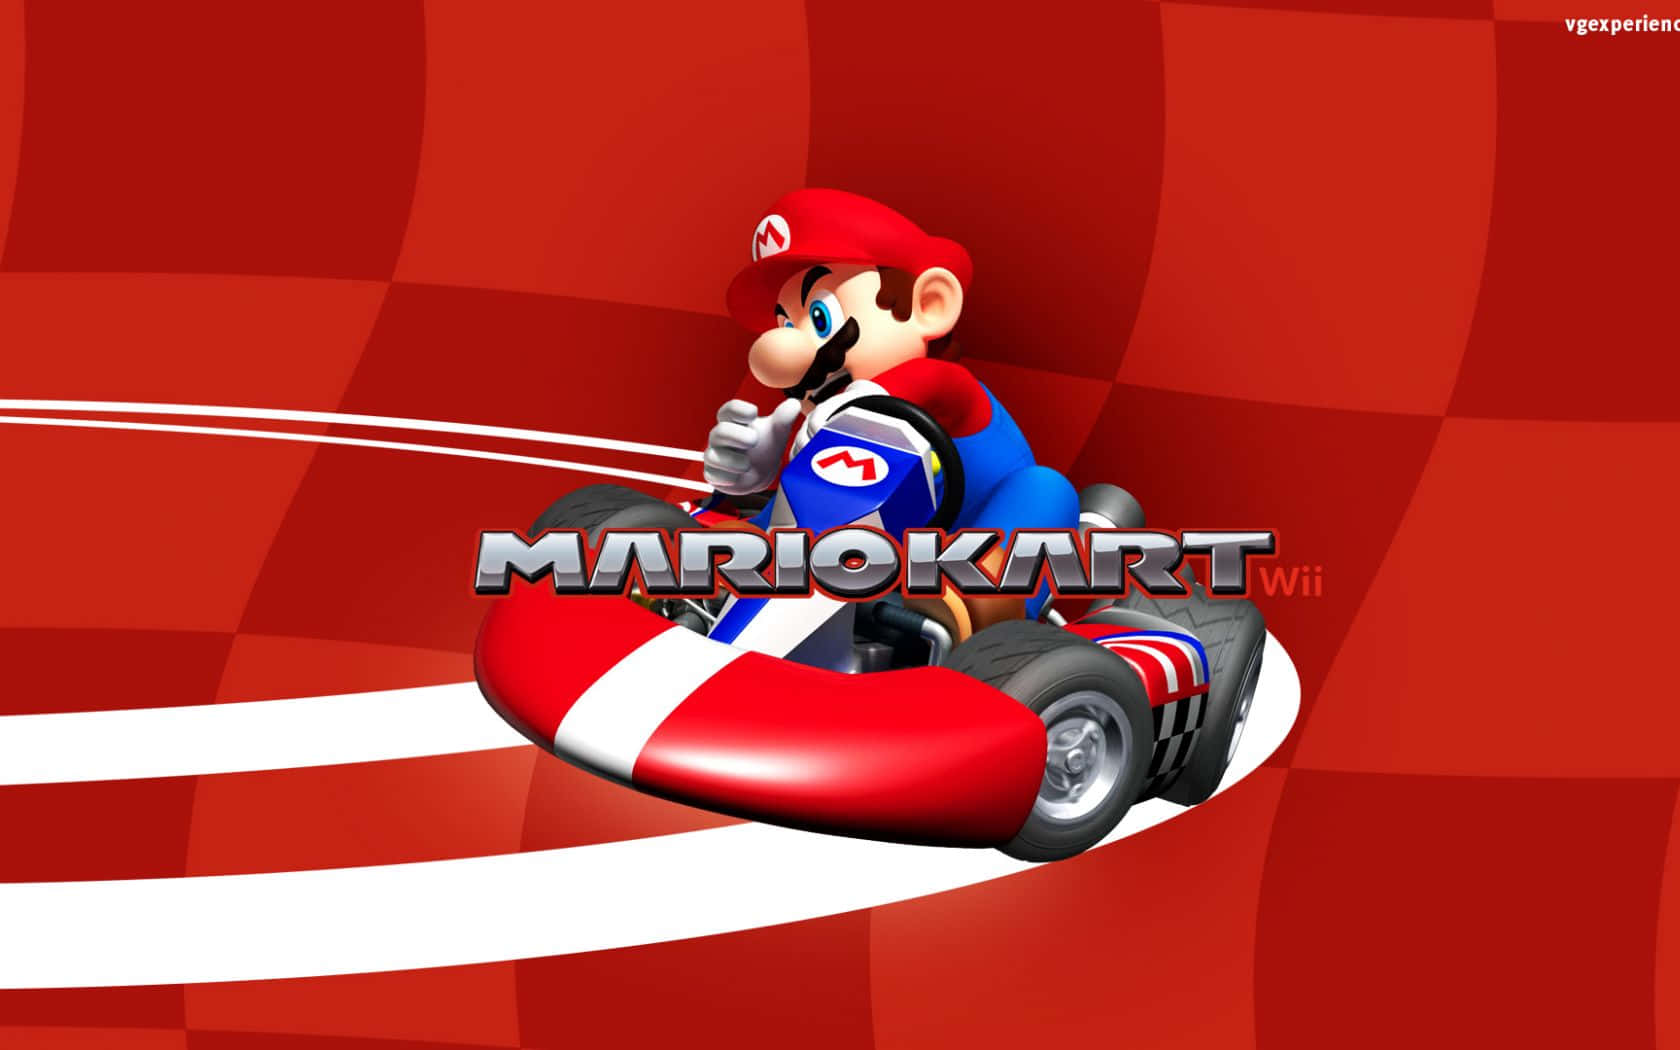 "It's Time To Race in Mario Kart!"